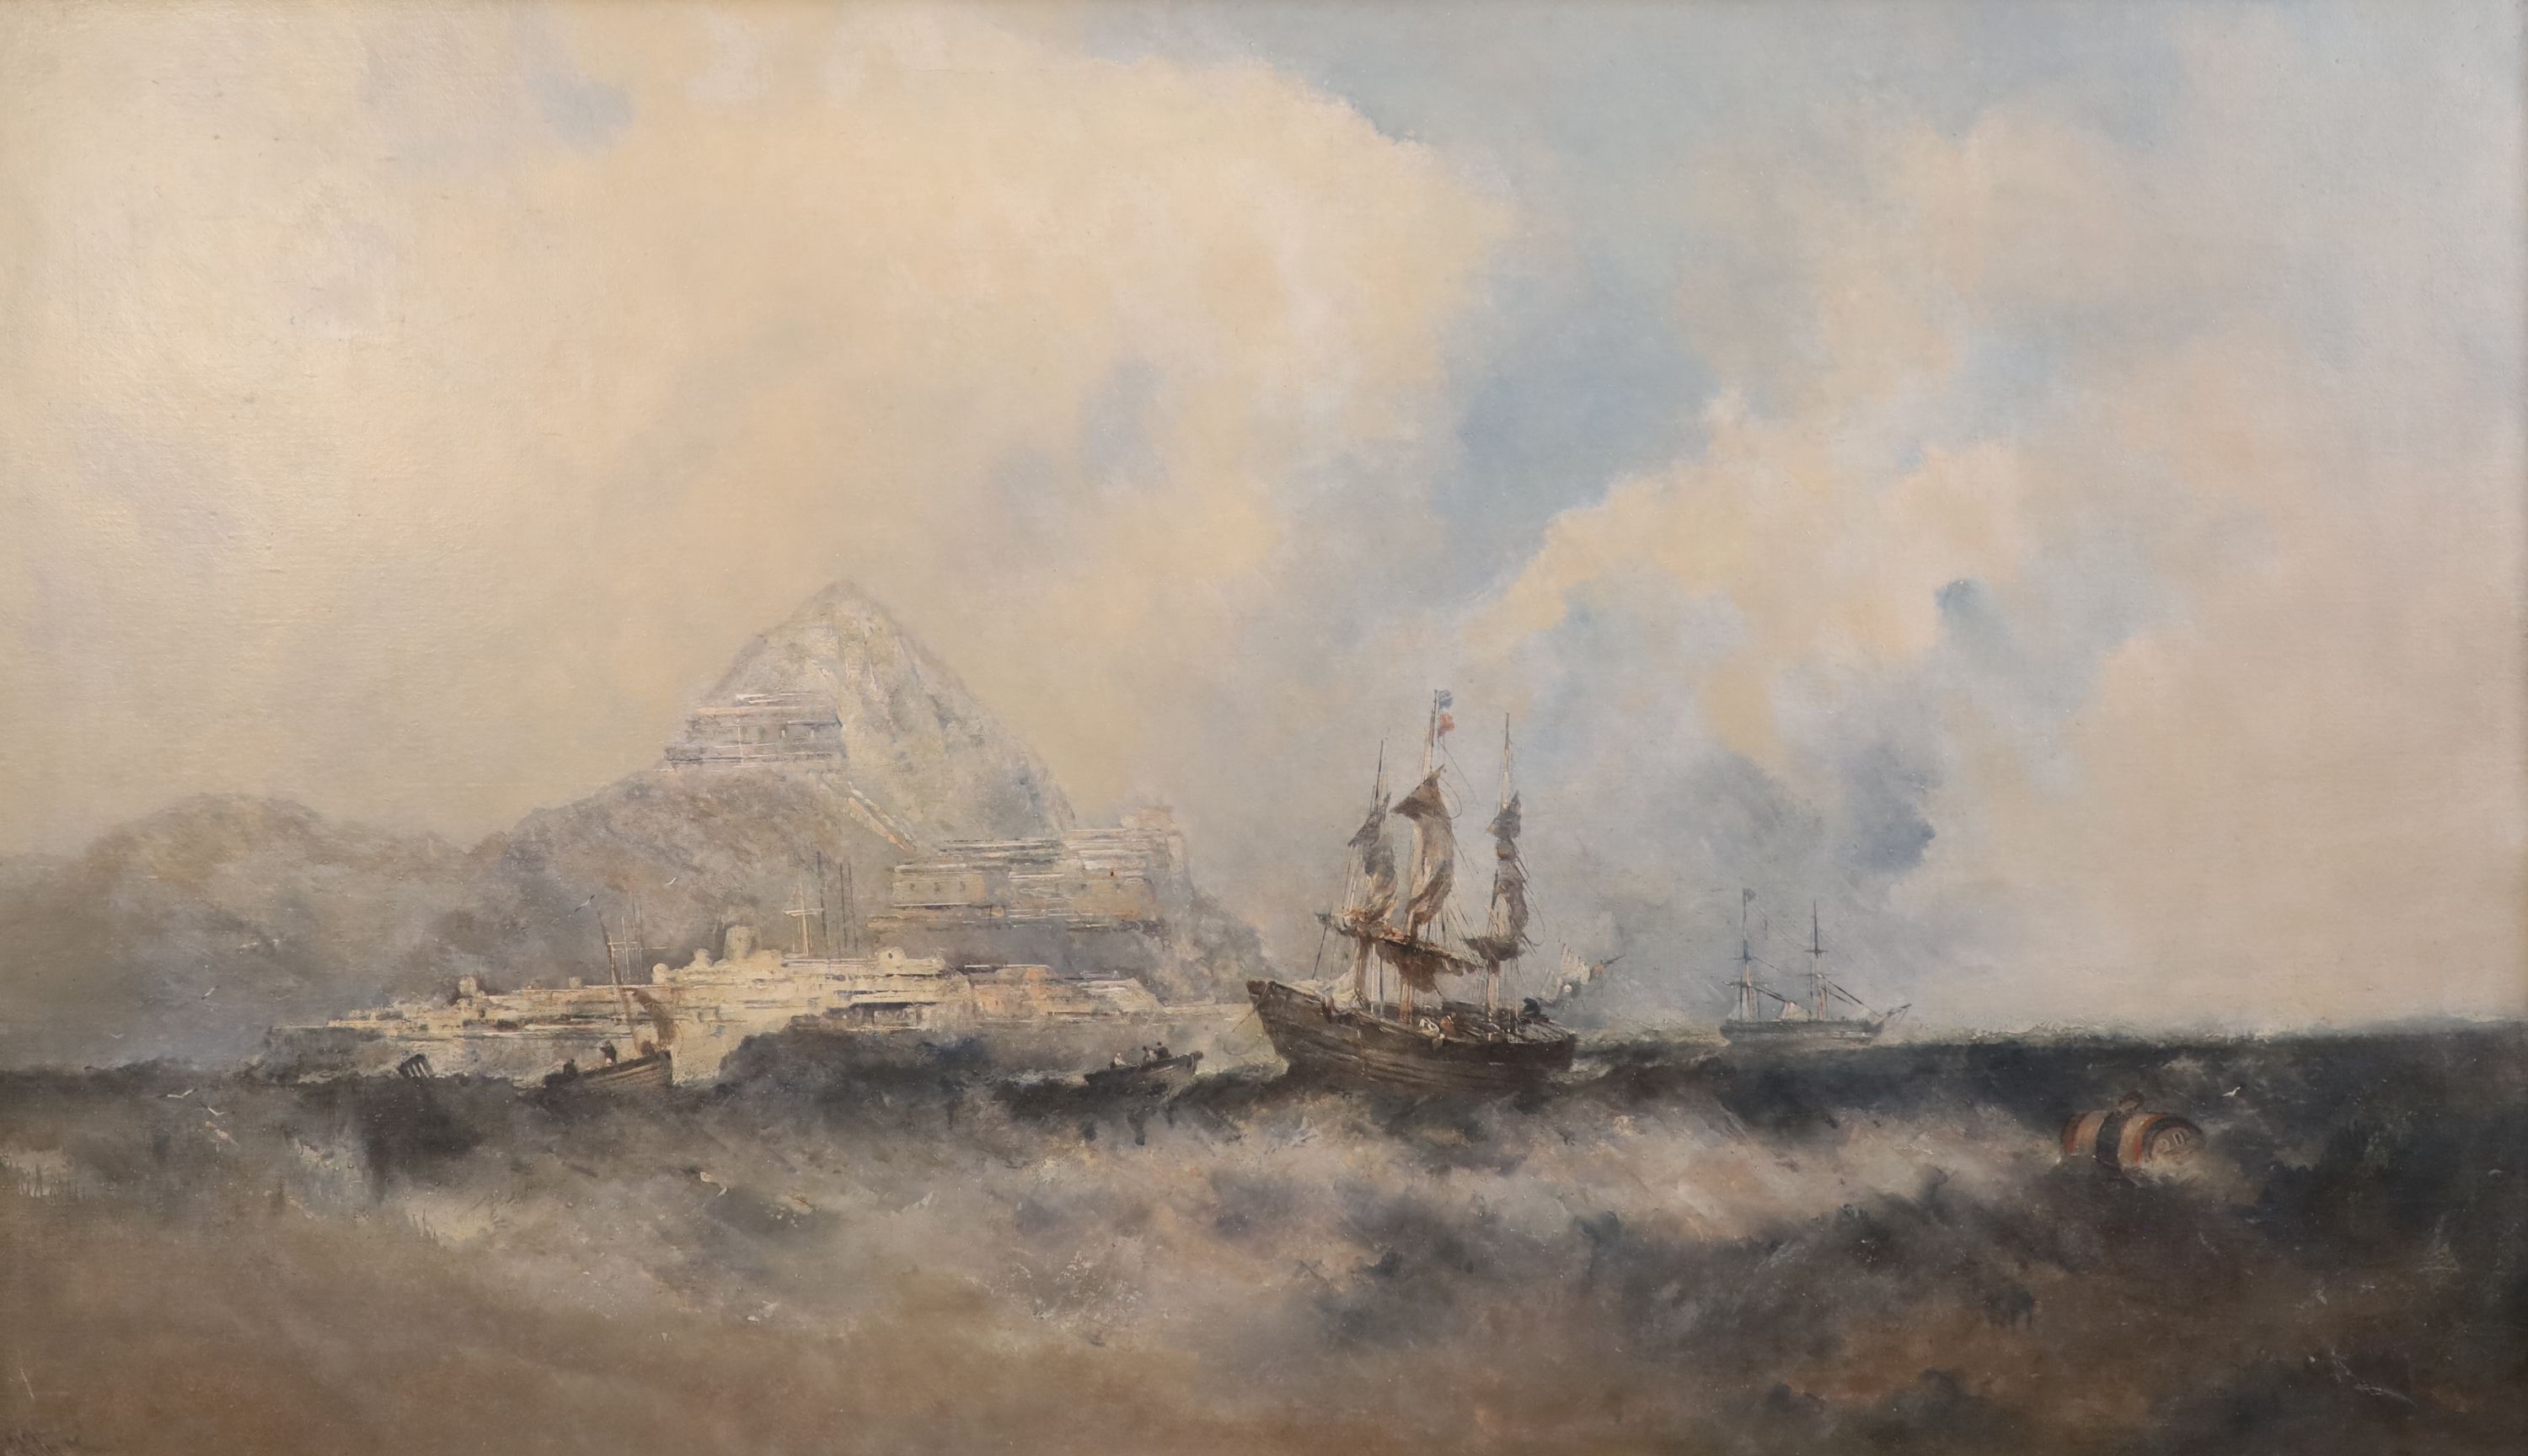 William McAlpine (fl.1820-1883), Shipping off the Chinese? coast, oil on canvas, 73.5 x 125.75cm